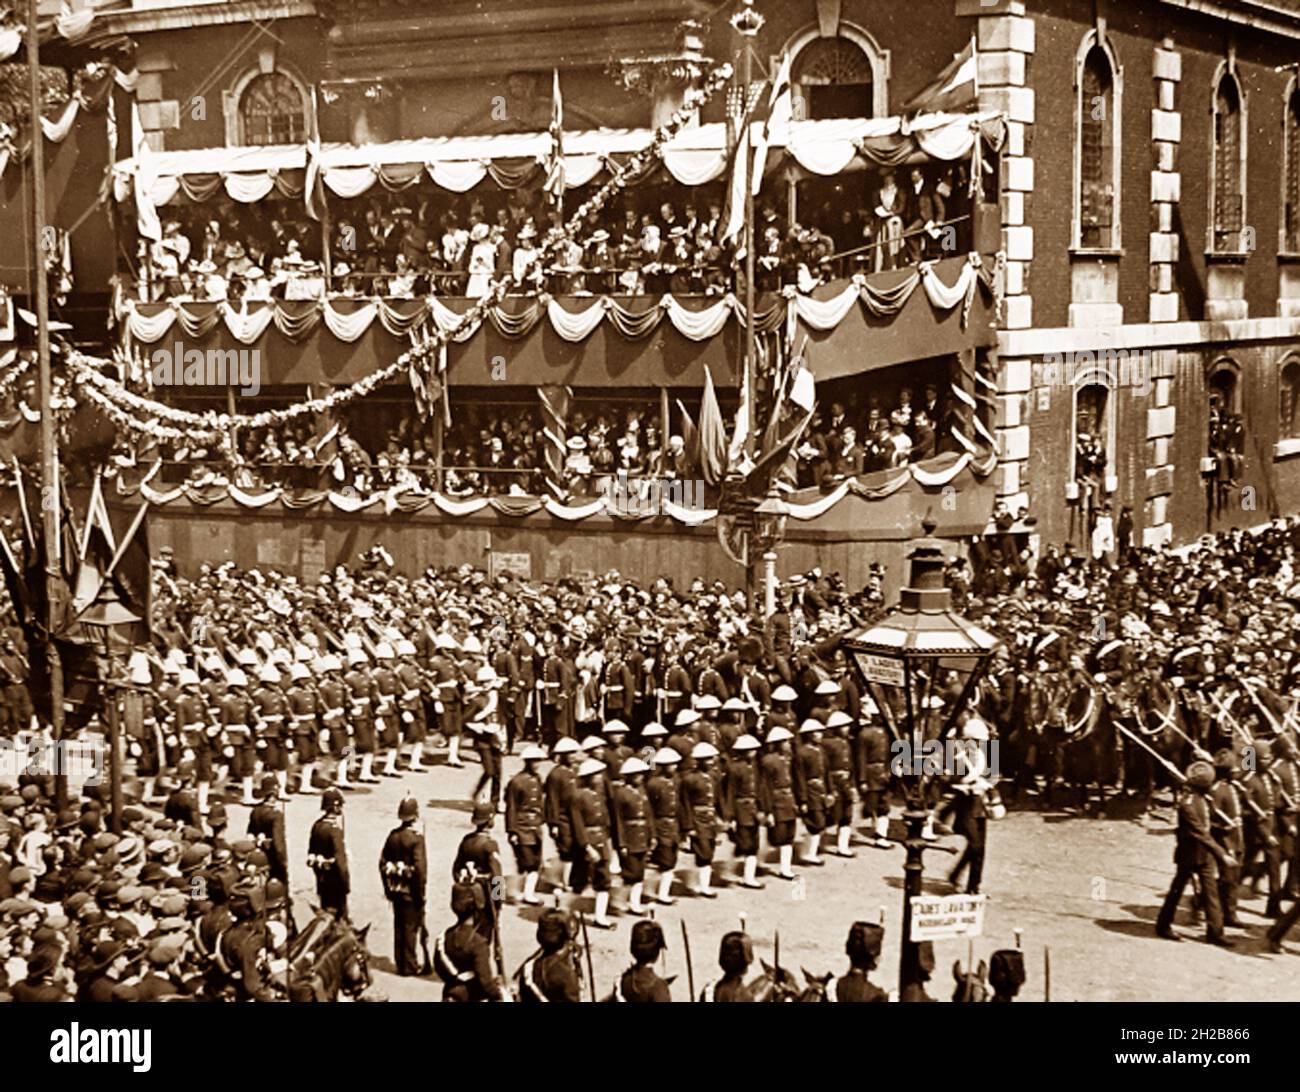 The Hong Kong Police, Queen Victoria's Diamond Jubilee parade, London in 1897 Stock Photo